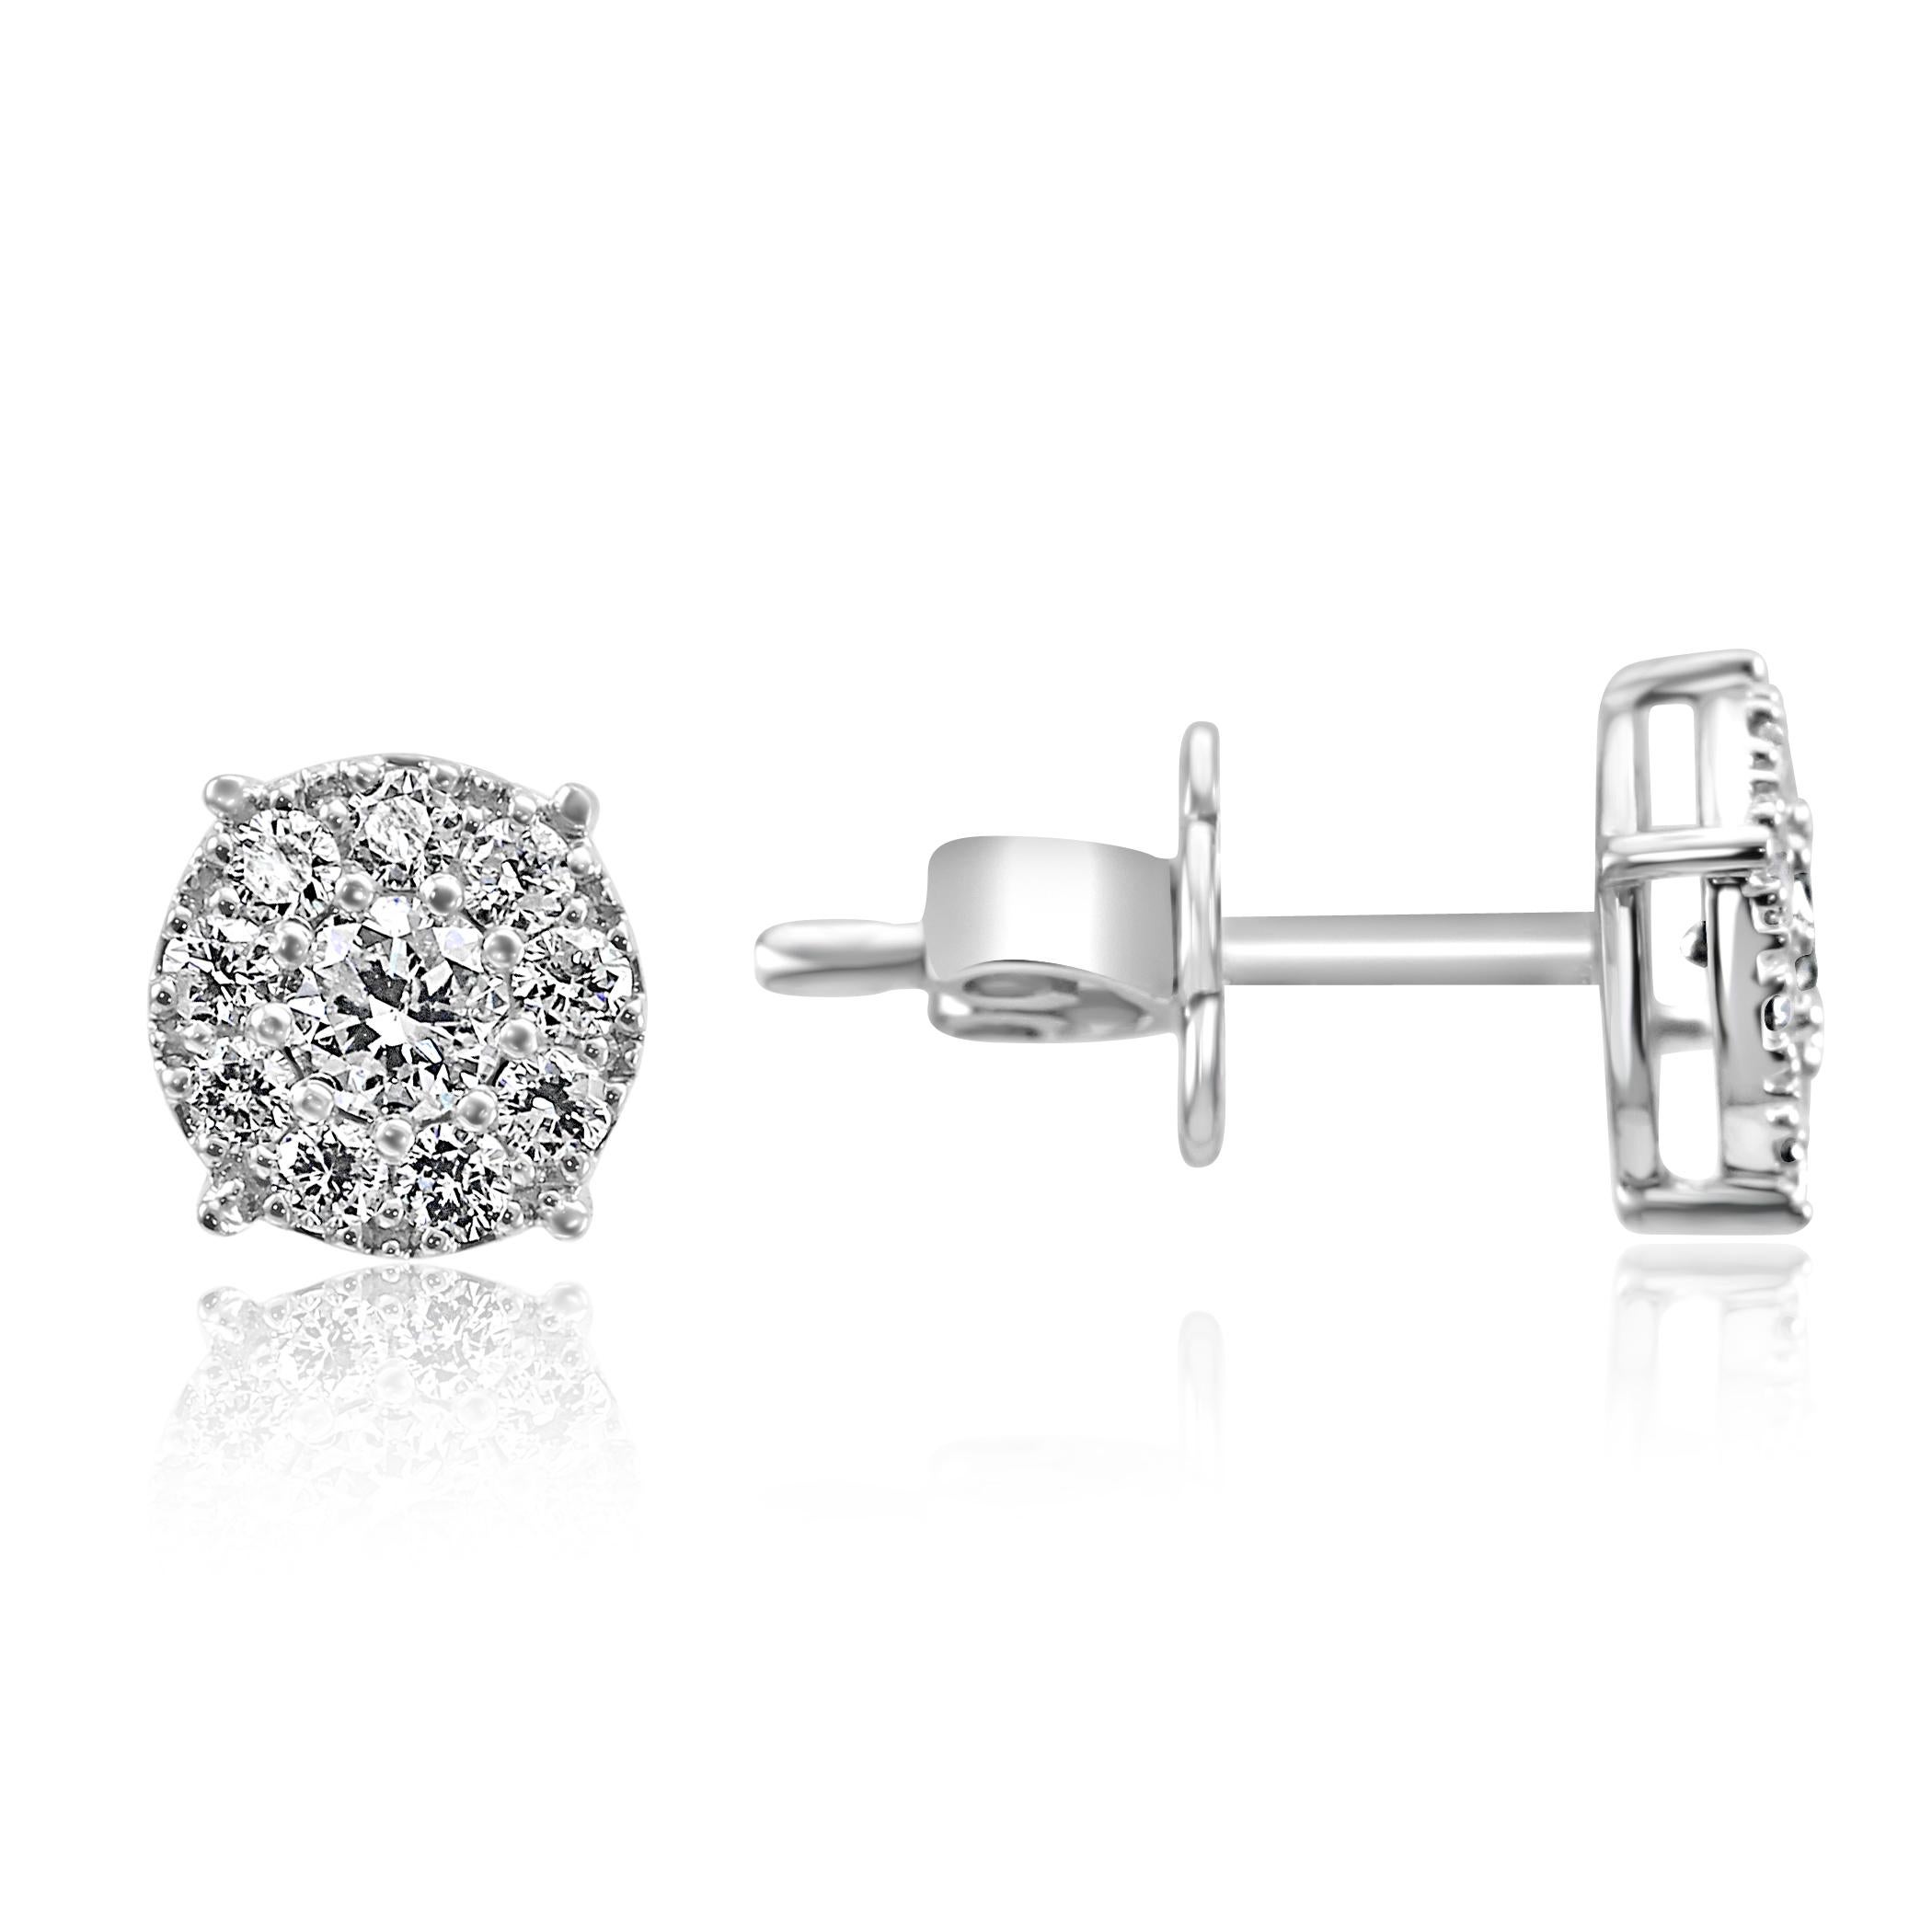 Stunning Big Look 20 White G-H Color SI clarity Diamond Round Brilliant set in 14K White Gold Push Back Fashion Stud Earrings.
Total Diamond Weight 0.55 Carat

Style can be customized or custom made as per your requirements in different price ranges